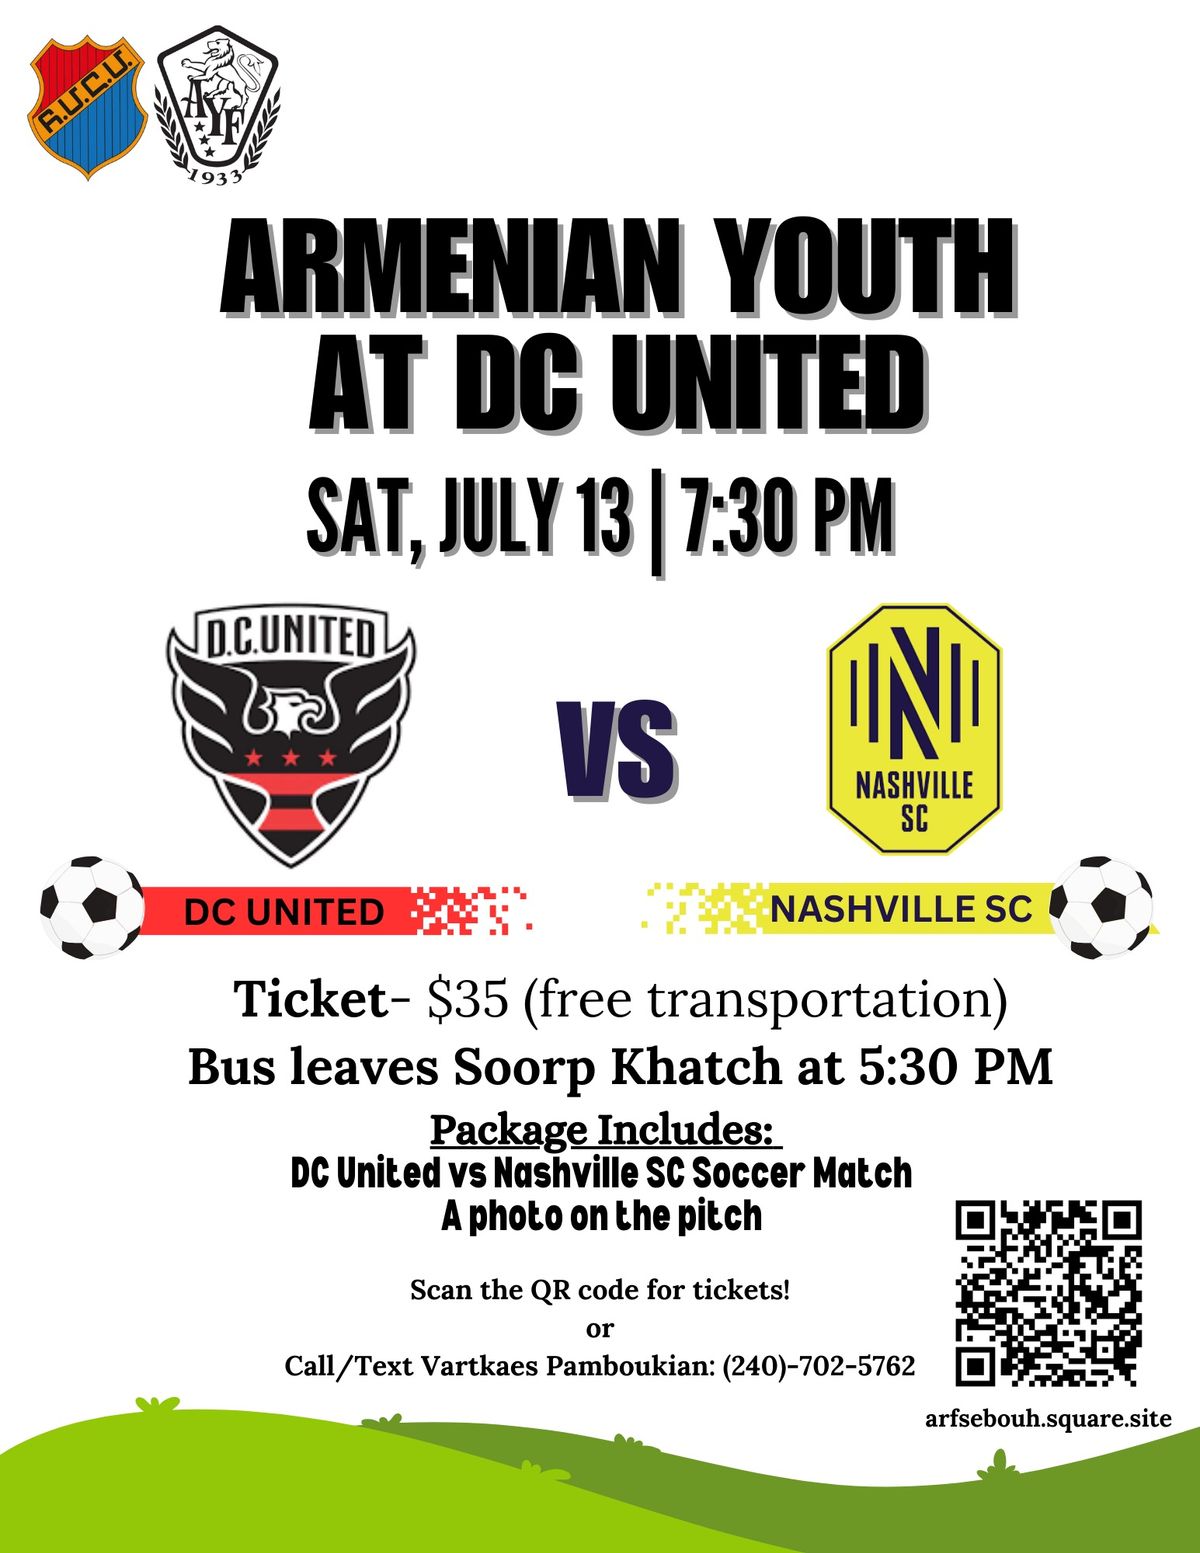 Armenian Youth at DC United